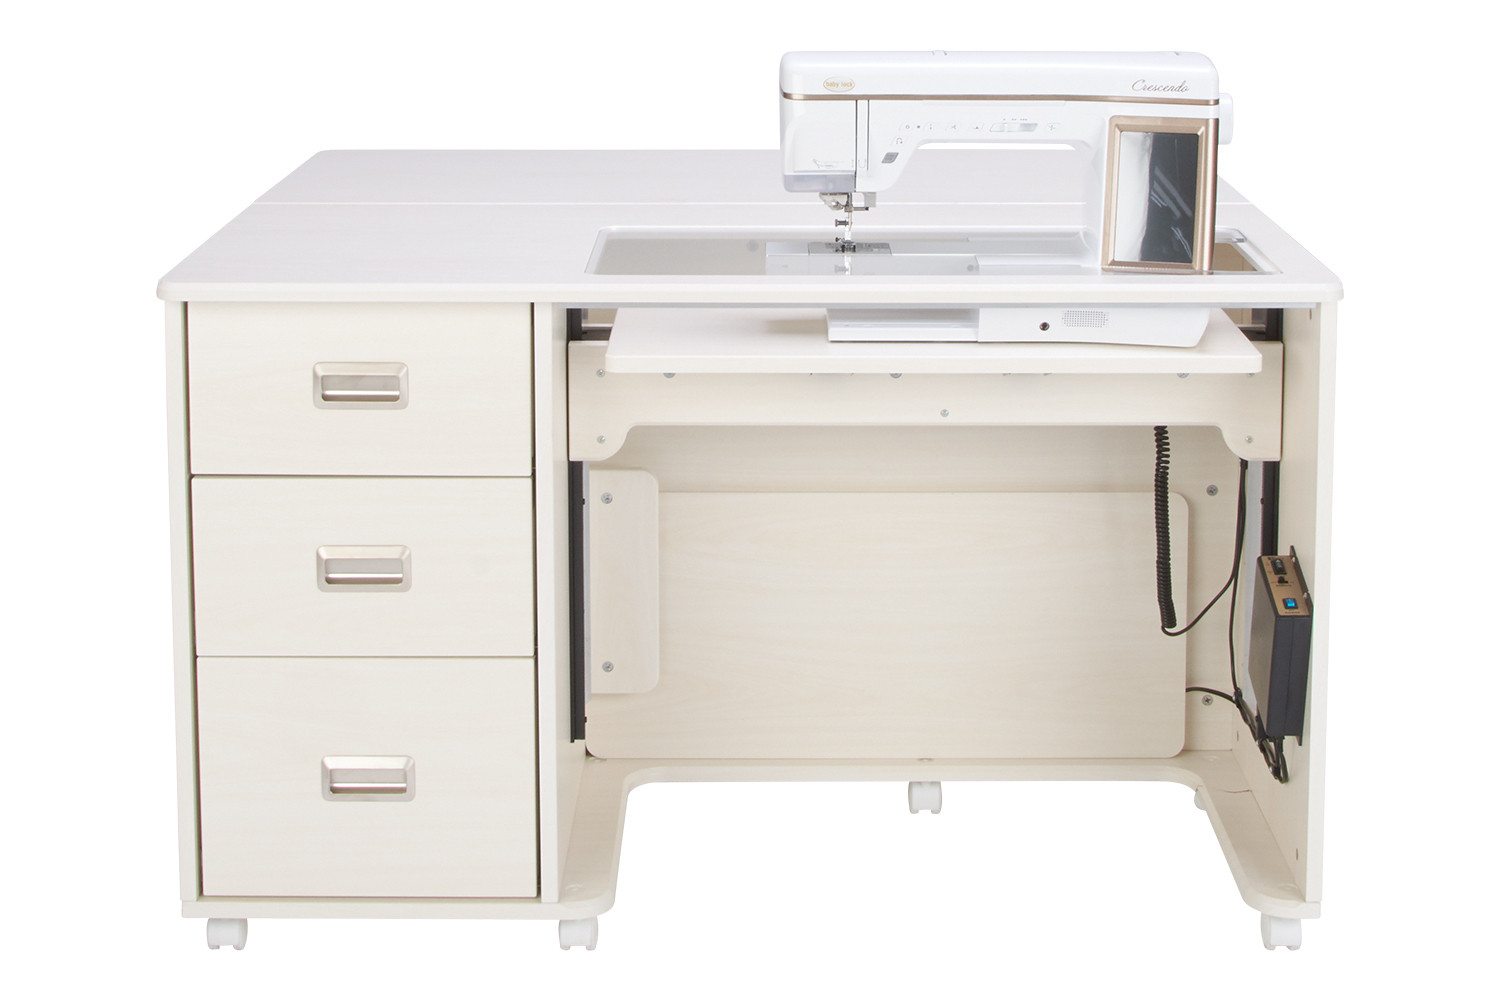 Artistry Drawer Center - clipped.20210222163232563